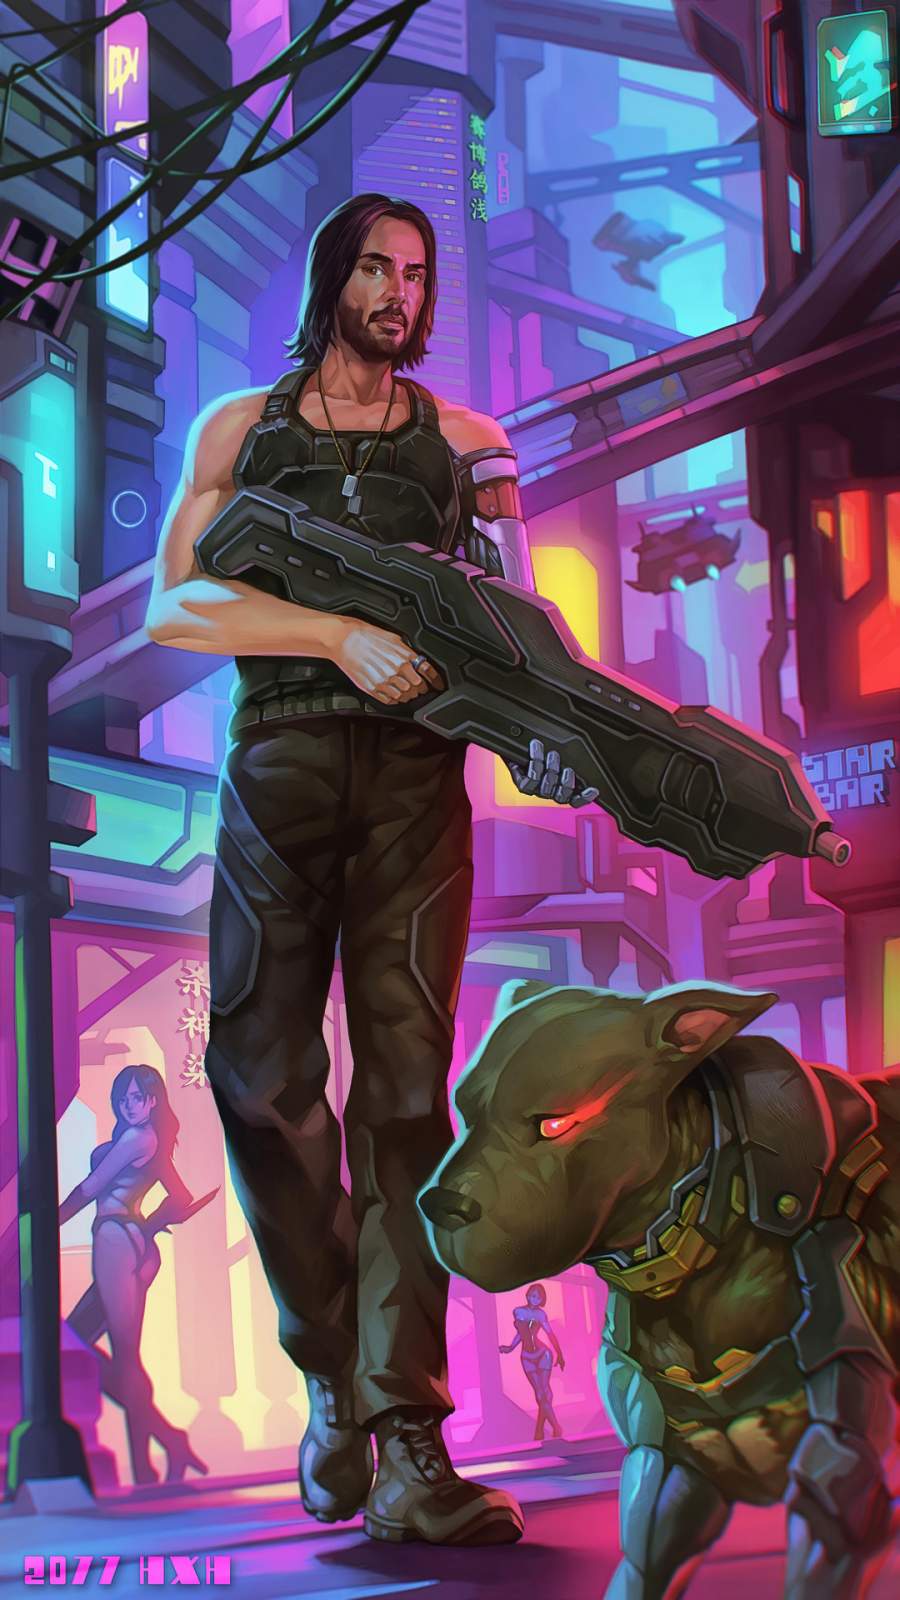 Cyberpunk 2077 Keanu Reeves iPhone Wallpaper with 900x1600 Resolution 2077 Zone